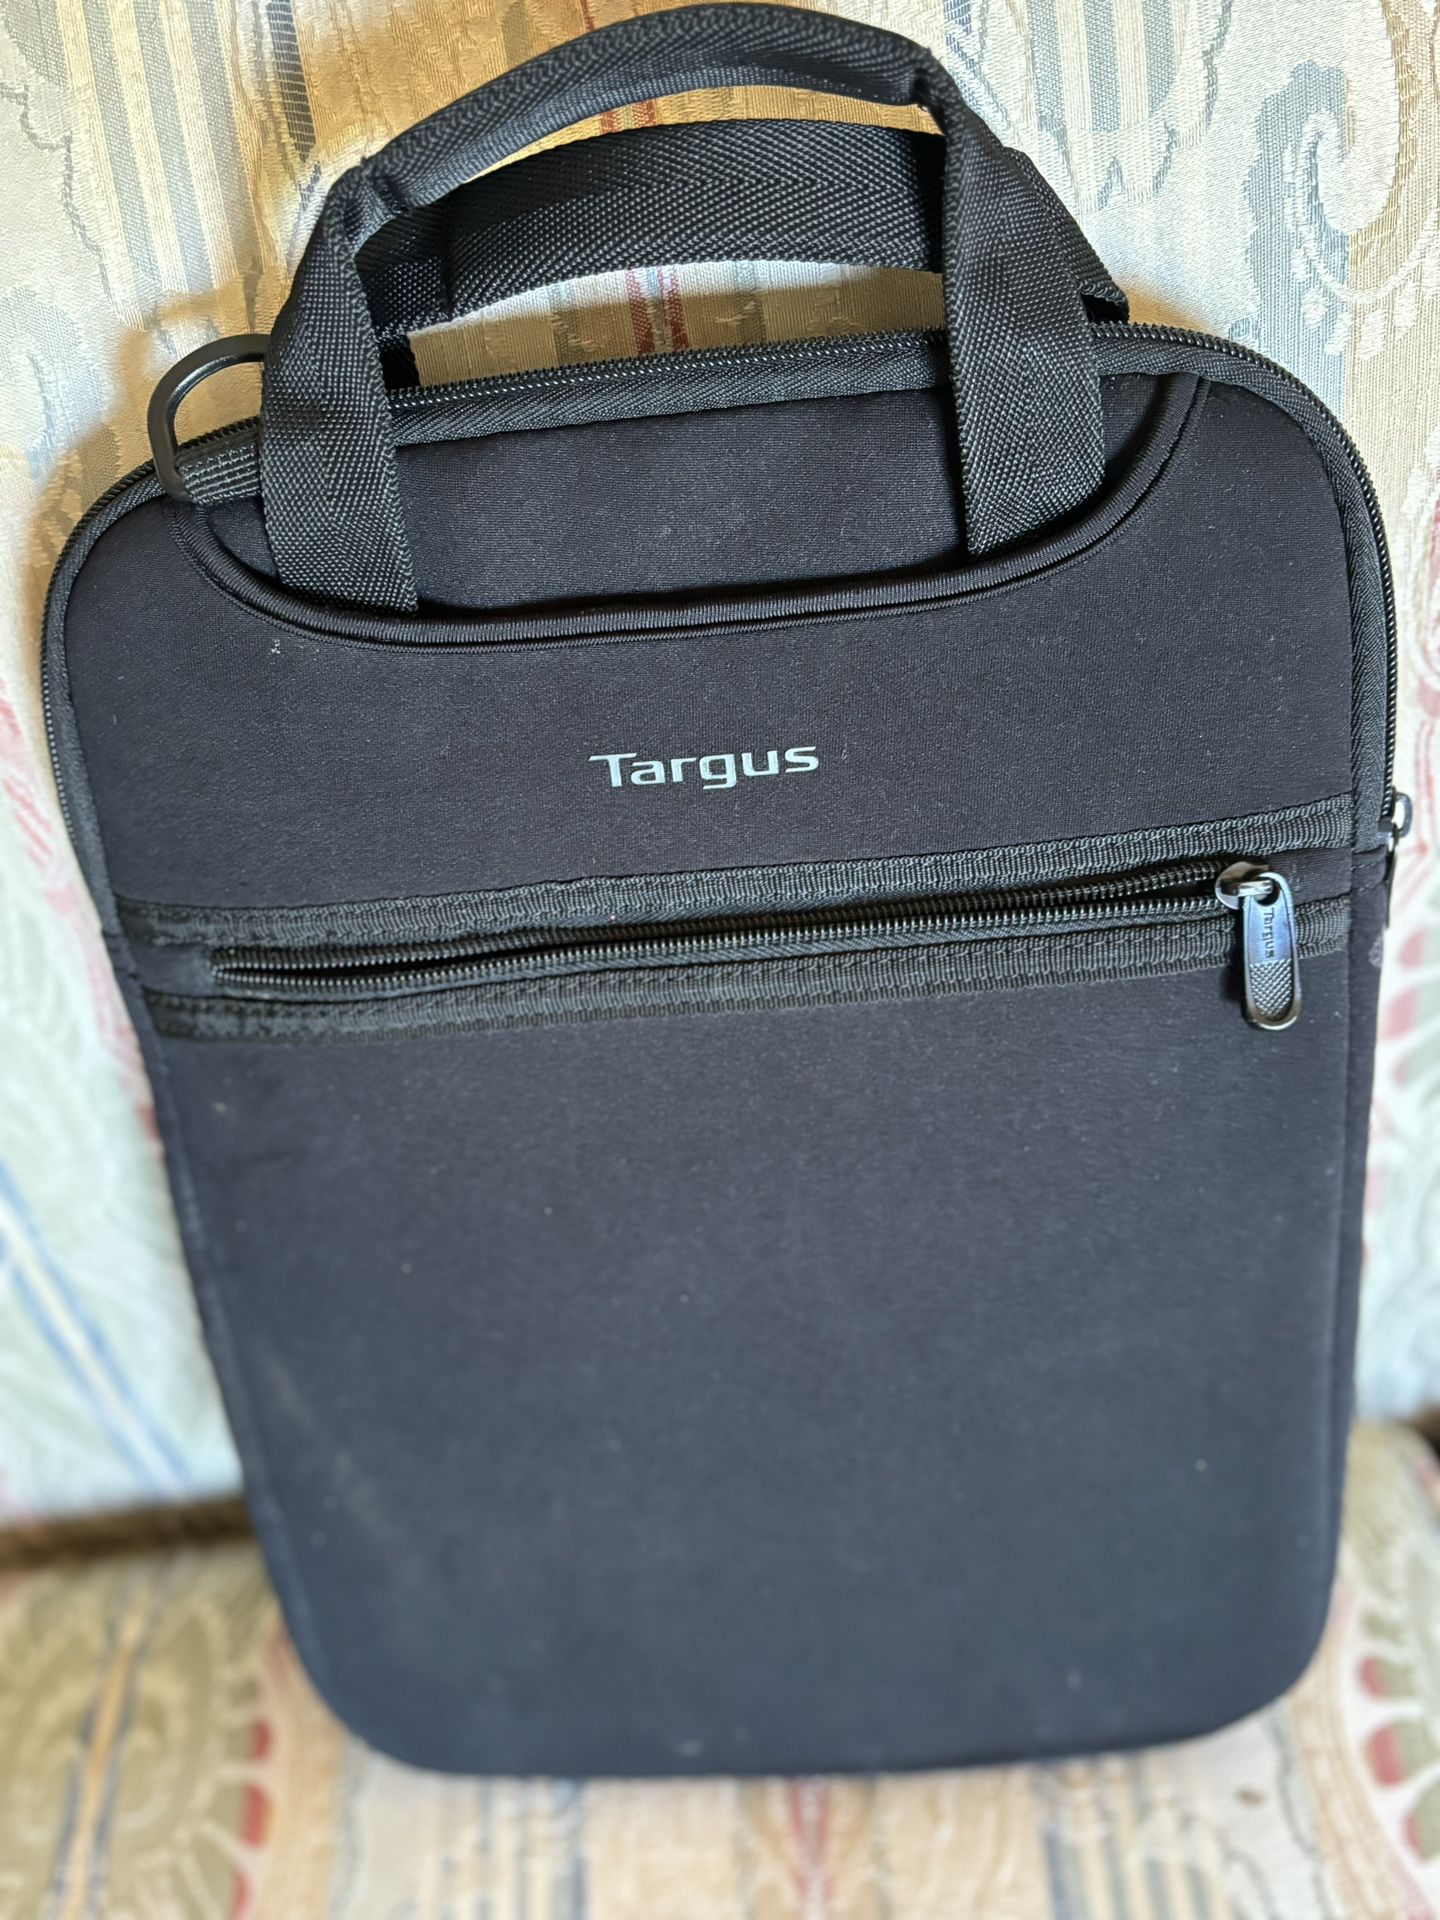 Bag Brand New Can Be Uses Laptop Or Any other Purpose 